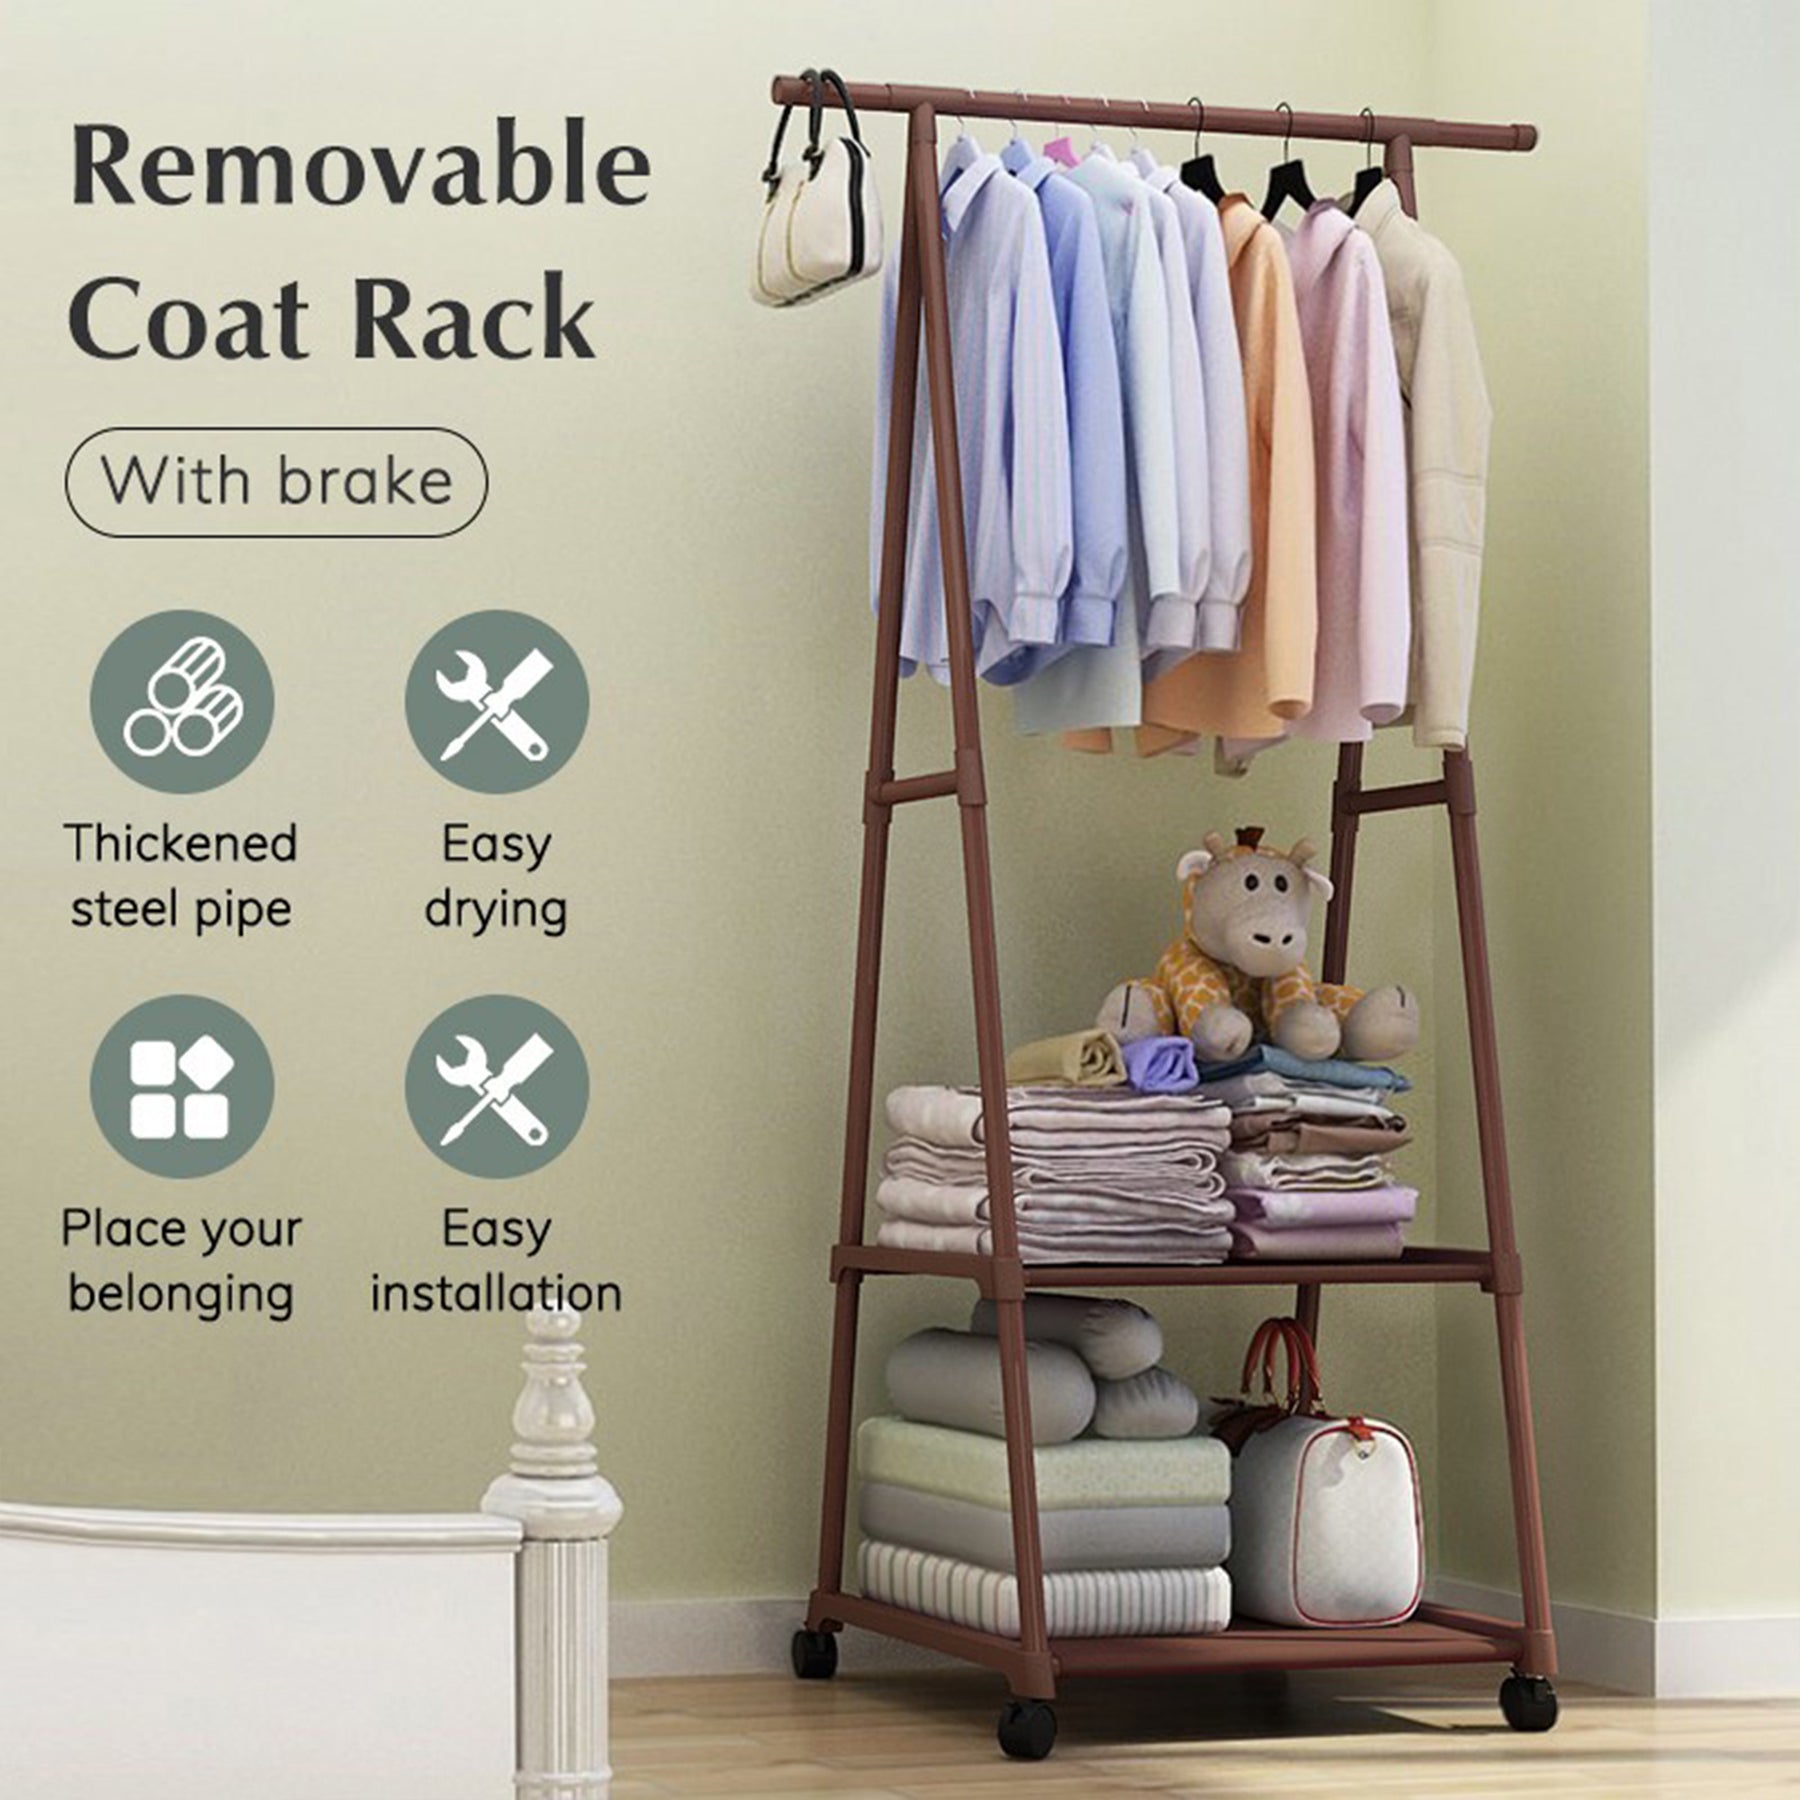 Light Weight Bearing Clothing Rack, Rolling Garment Rack for Hanging Clothes, Stand Coat Racks